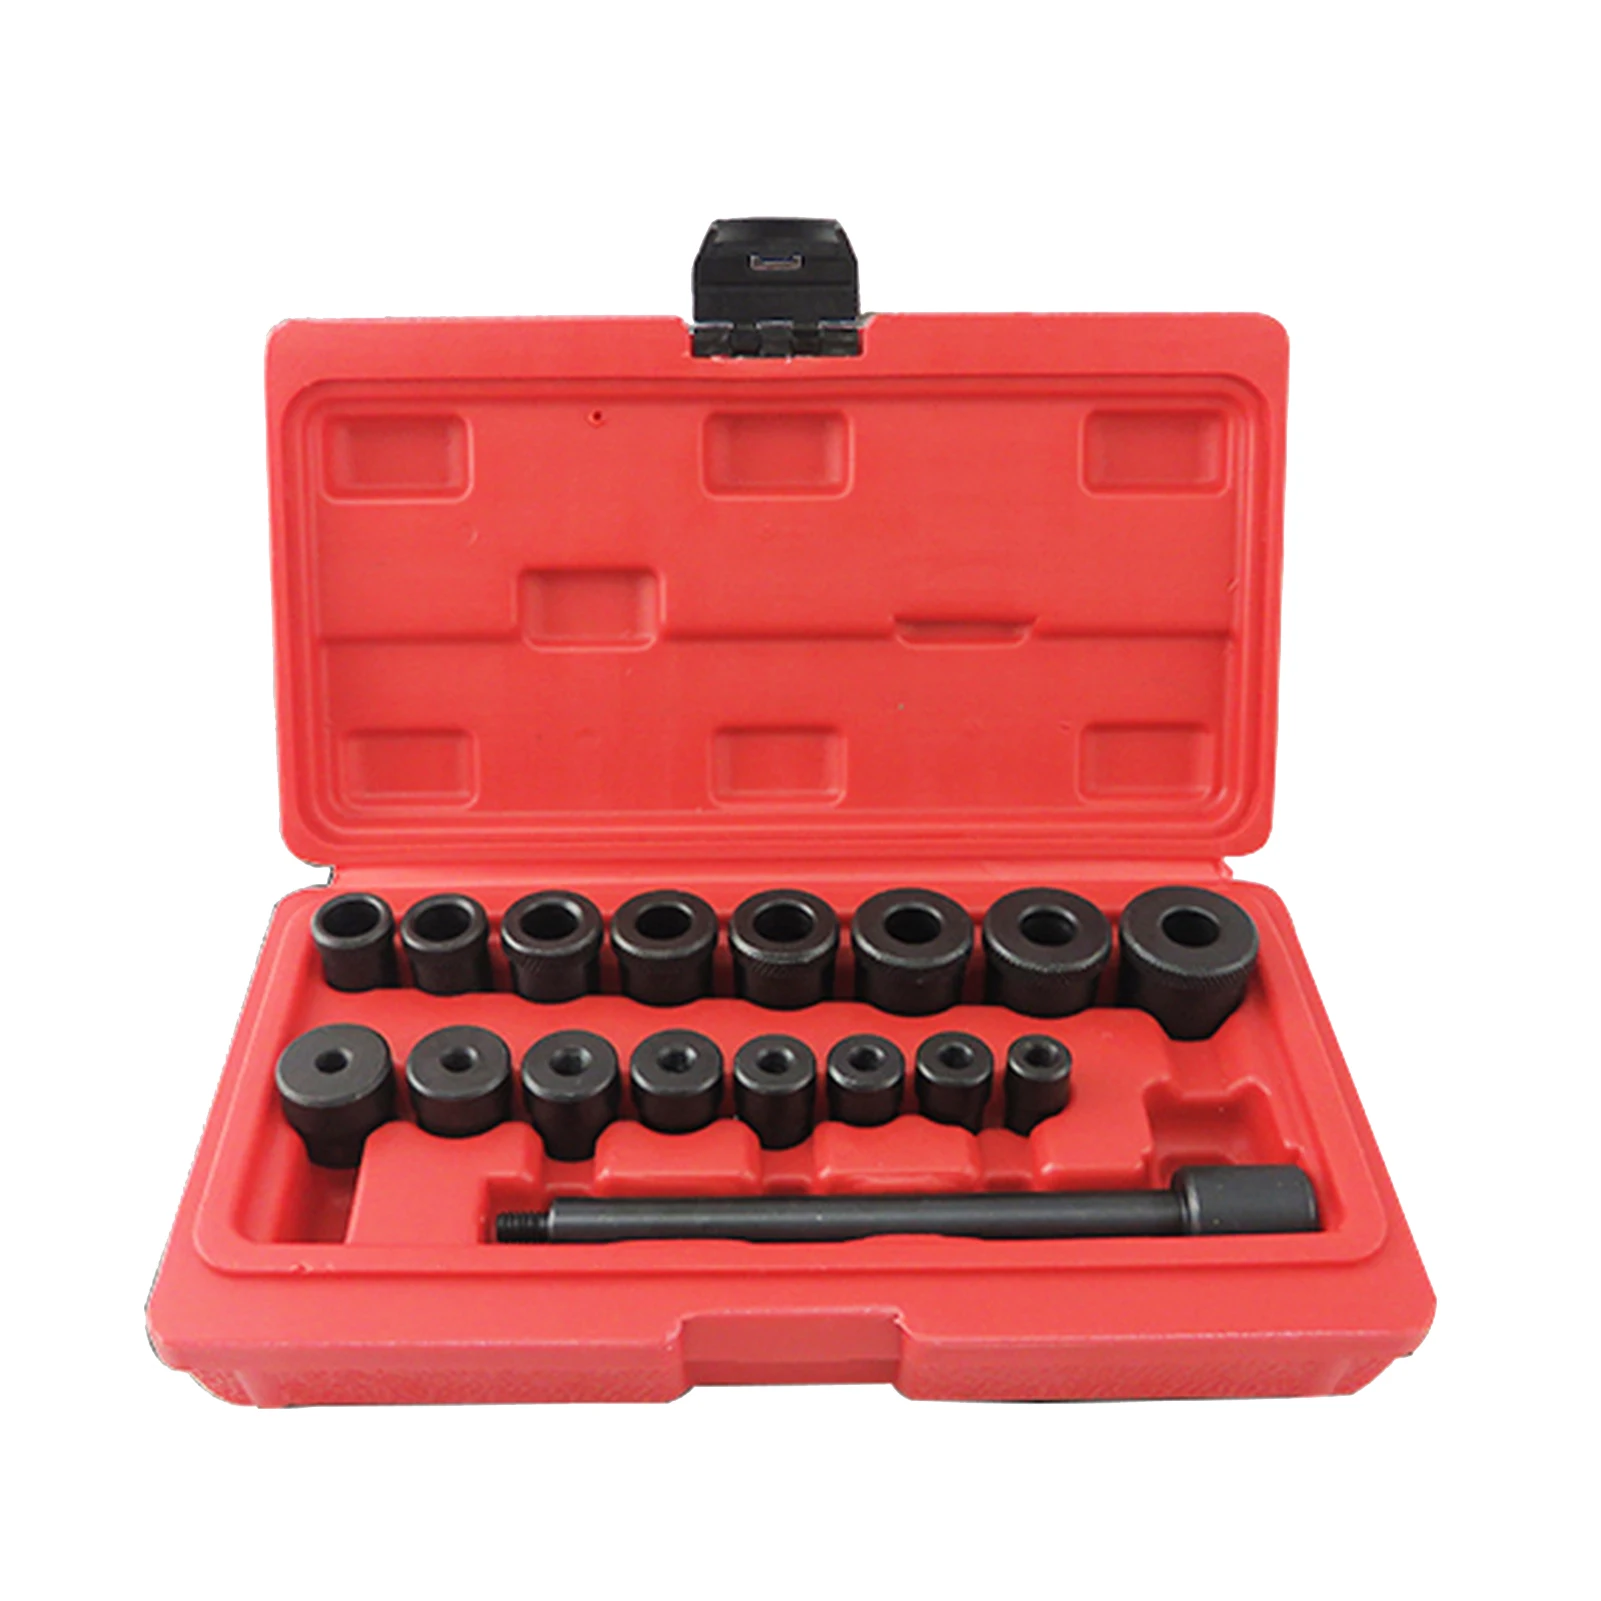 

Clutch Alignment Tool Kit 17pc Flywheel Pilot Hole and Clutch Drive Plate Aligning Tool Automobile Installation with Plastic Box